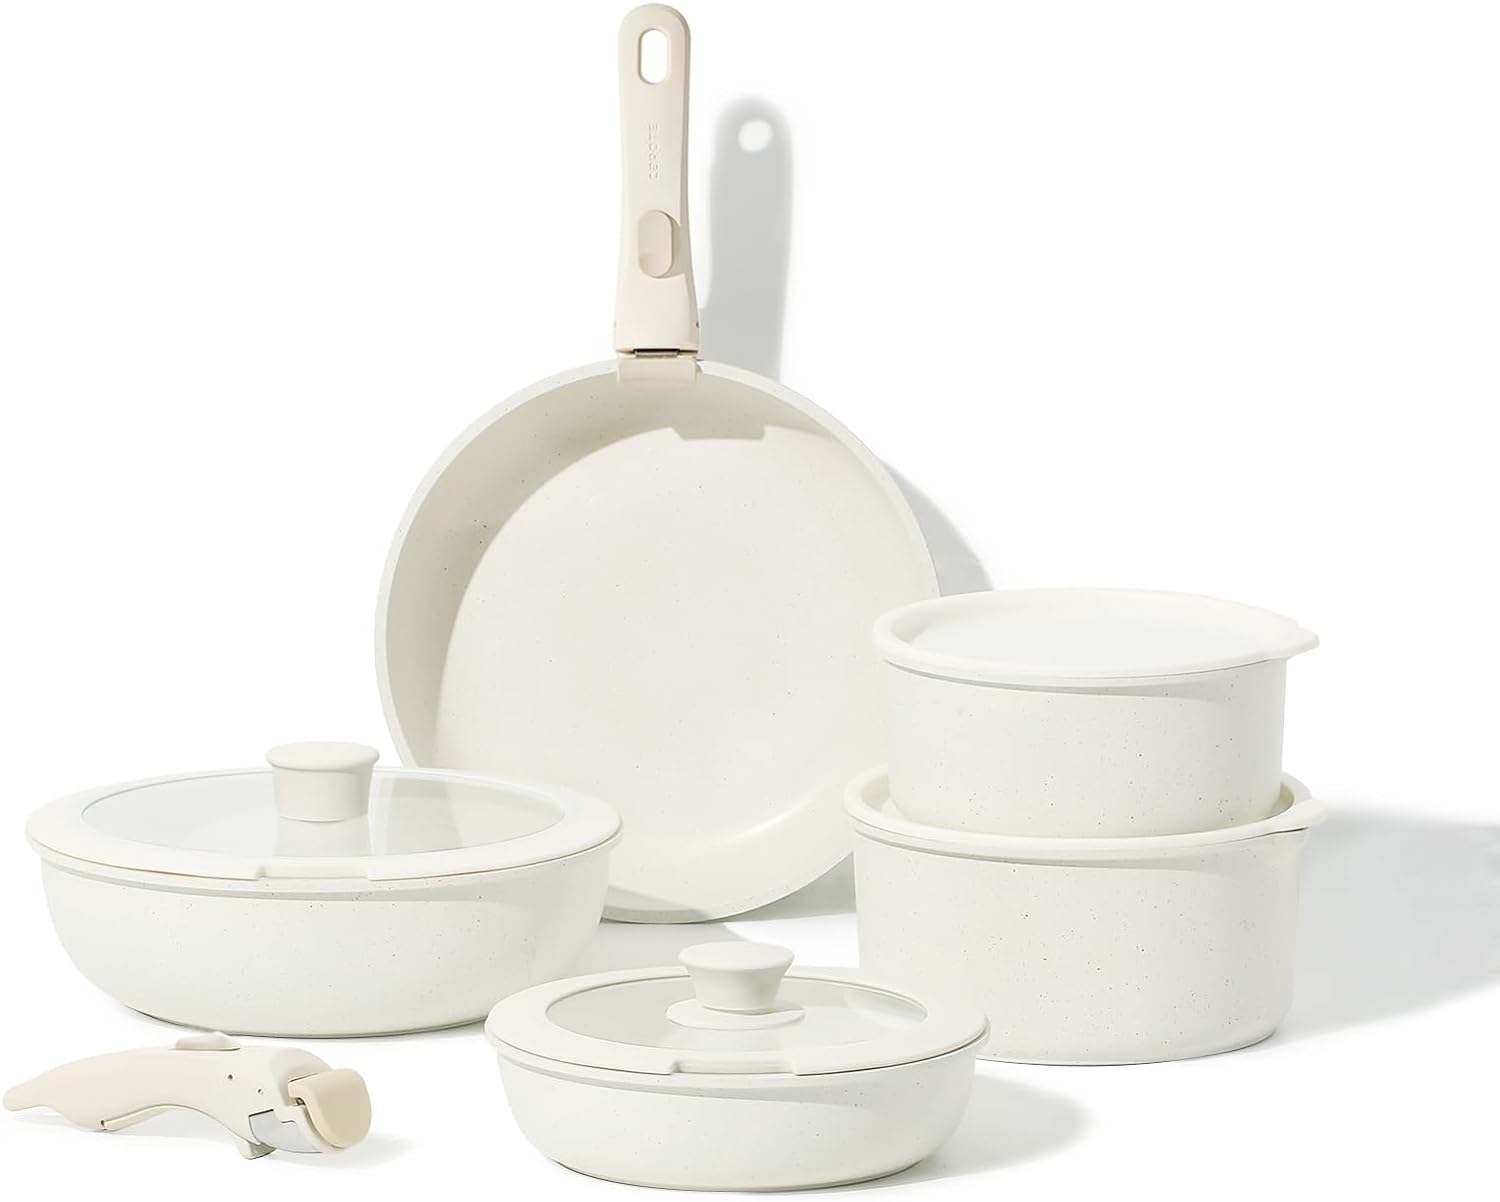 Kitchenware set including pots, pans, and lids designed for space-saving with detachable handles